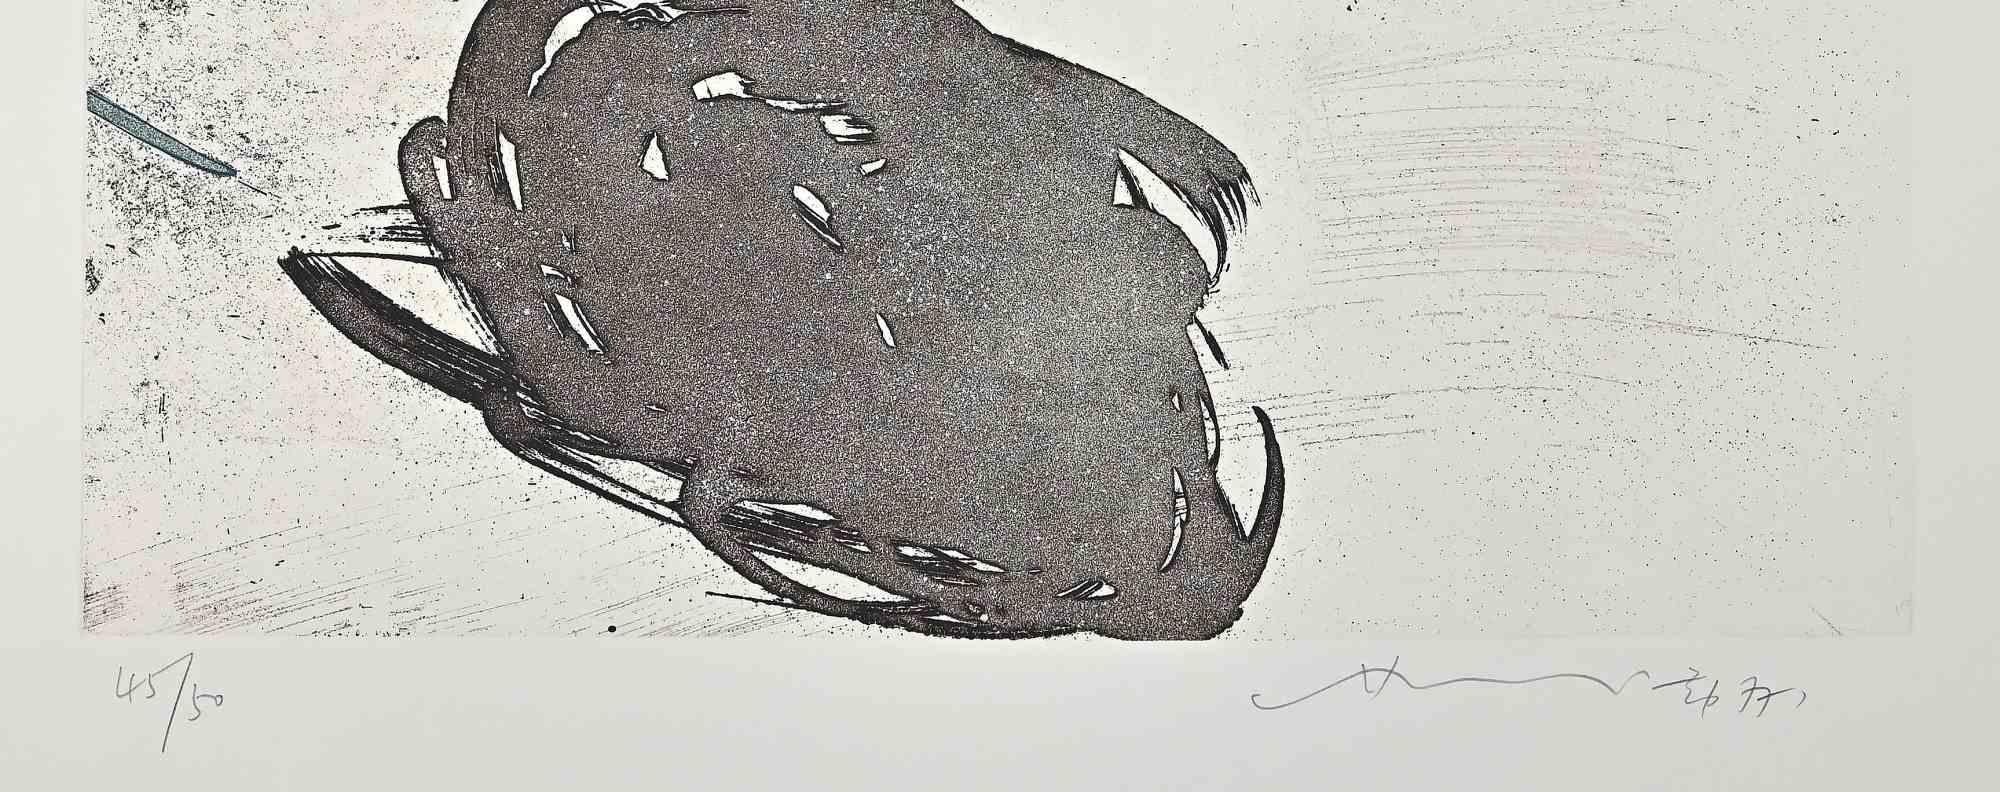 Abstract Composition - Etching by Hsiao Chin - 1970s For Sale 1